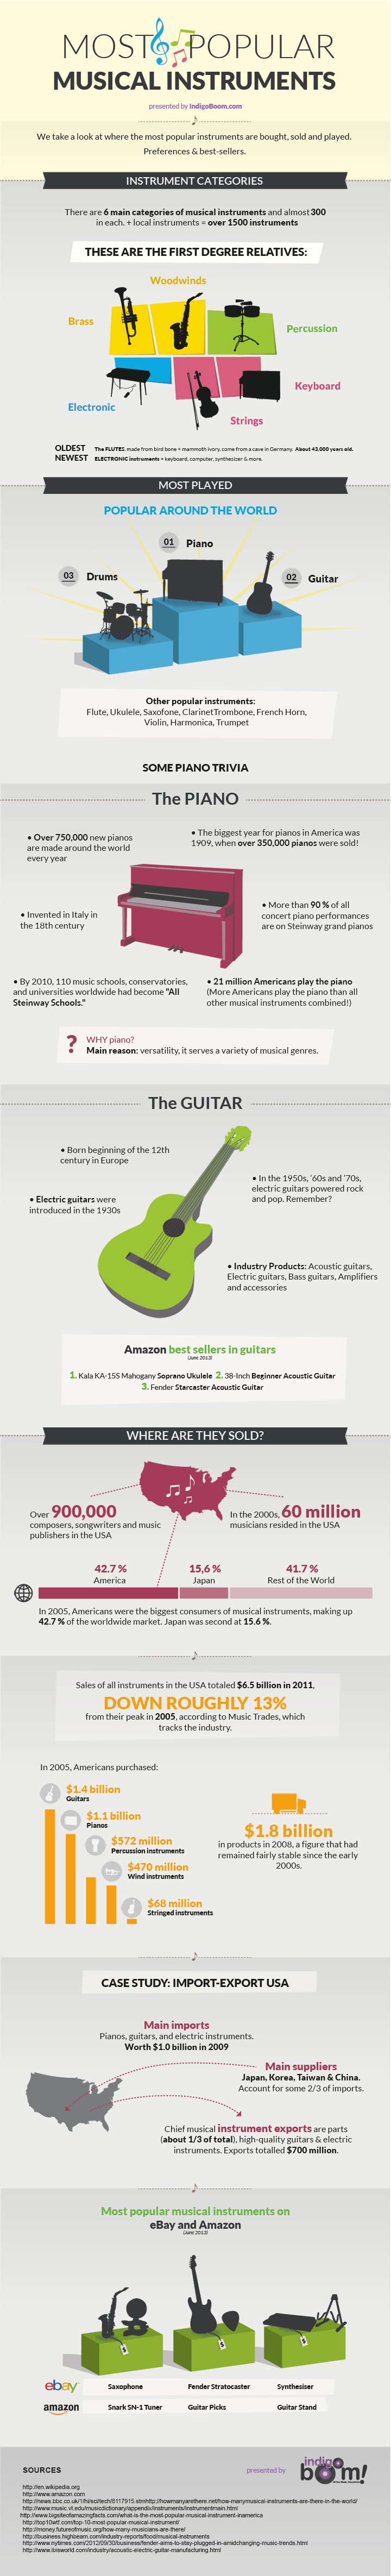 The Most Popular Musical Instruments